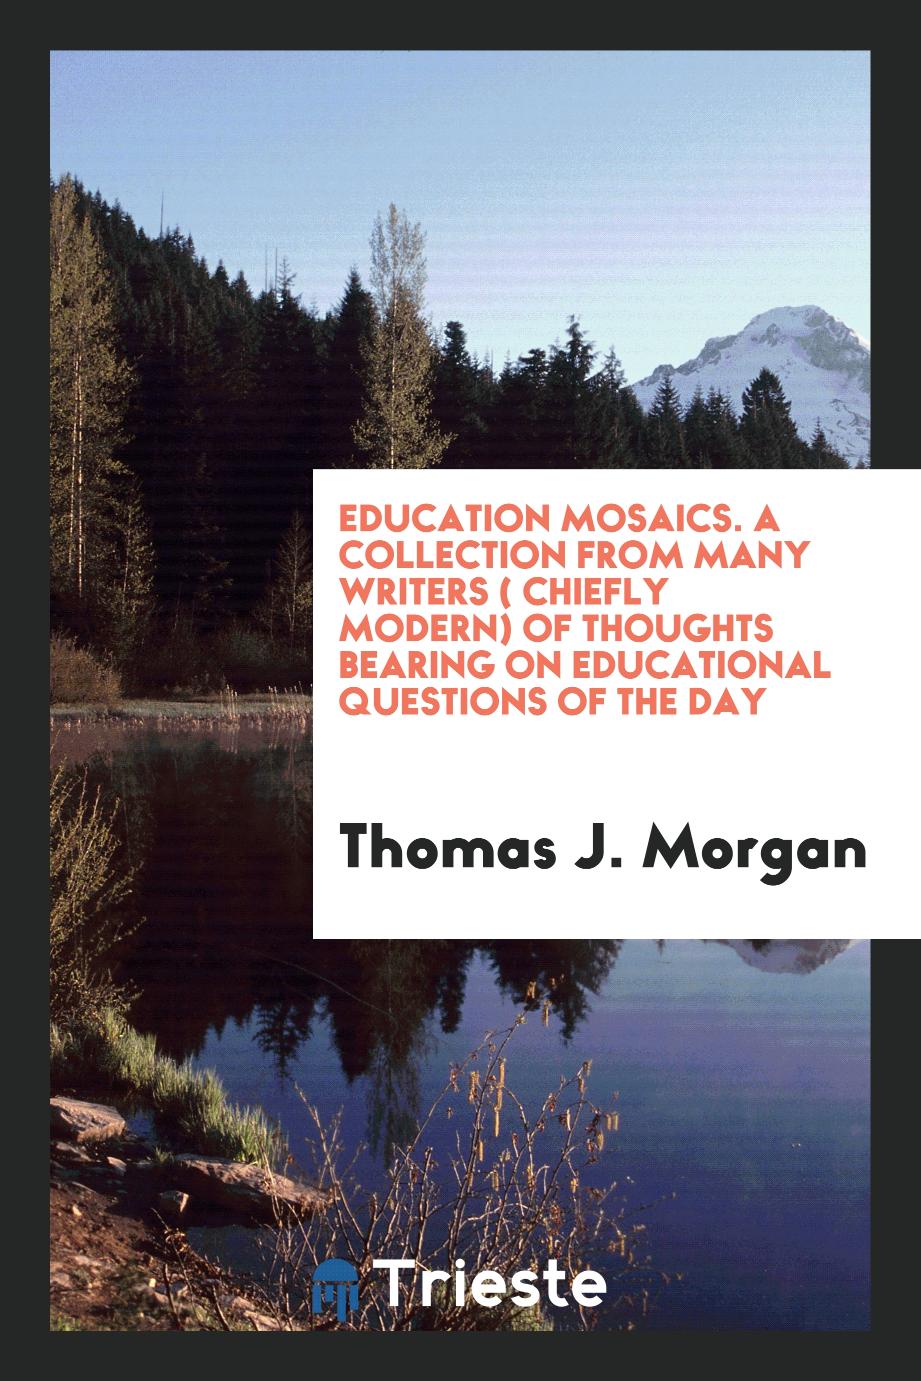 Education Mosaics. A Collection from Many Writers ( Chiefly Modern) of Thoughts Bearing on Educational Questions of the Day